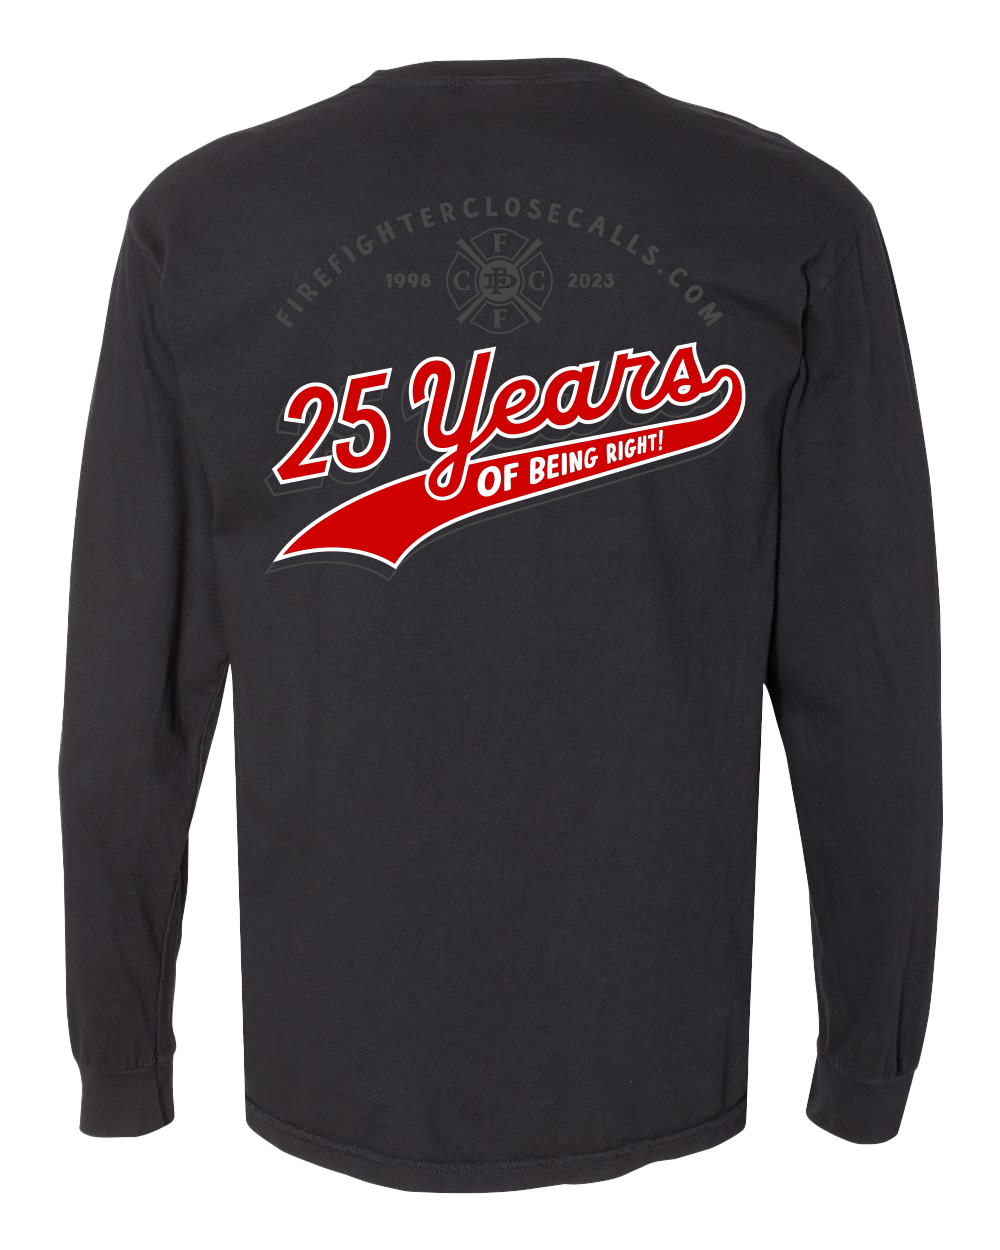 Firefighter Close Calls 25th Anniversary Long Sleeve